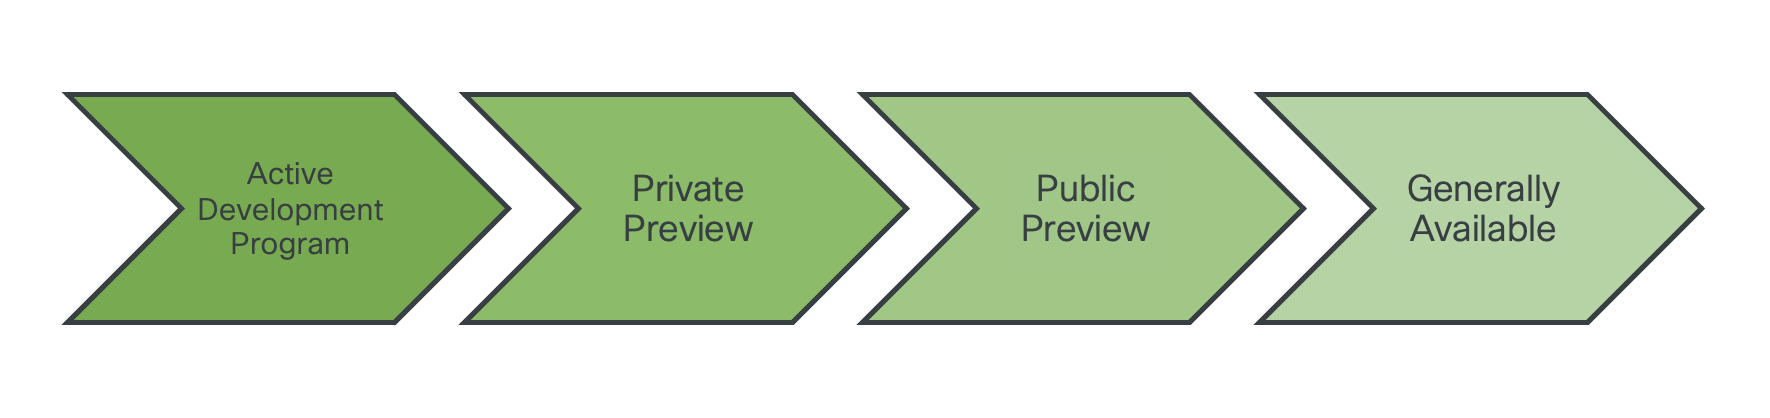 A flow chart showing the process of a product launch, from active development program to private preview to public preview to generally available